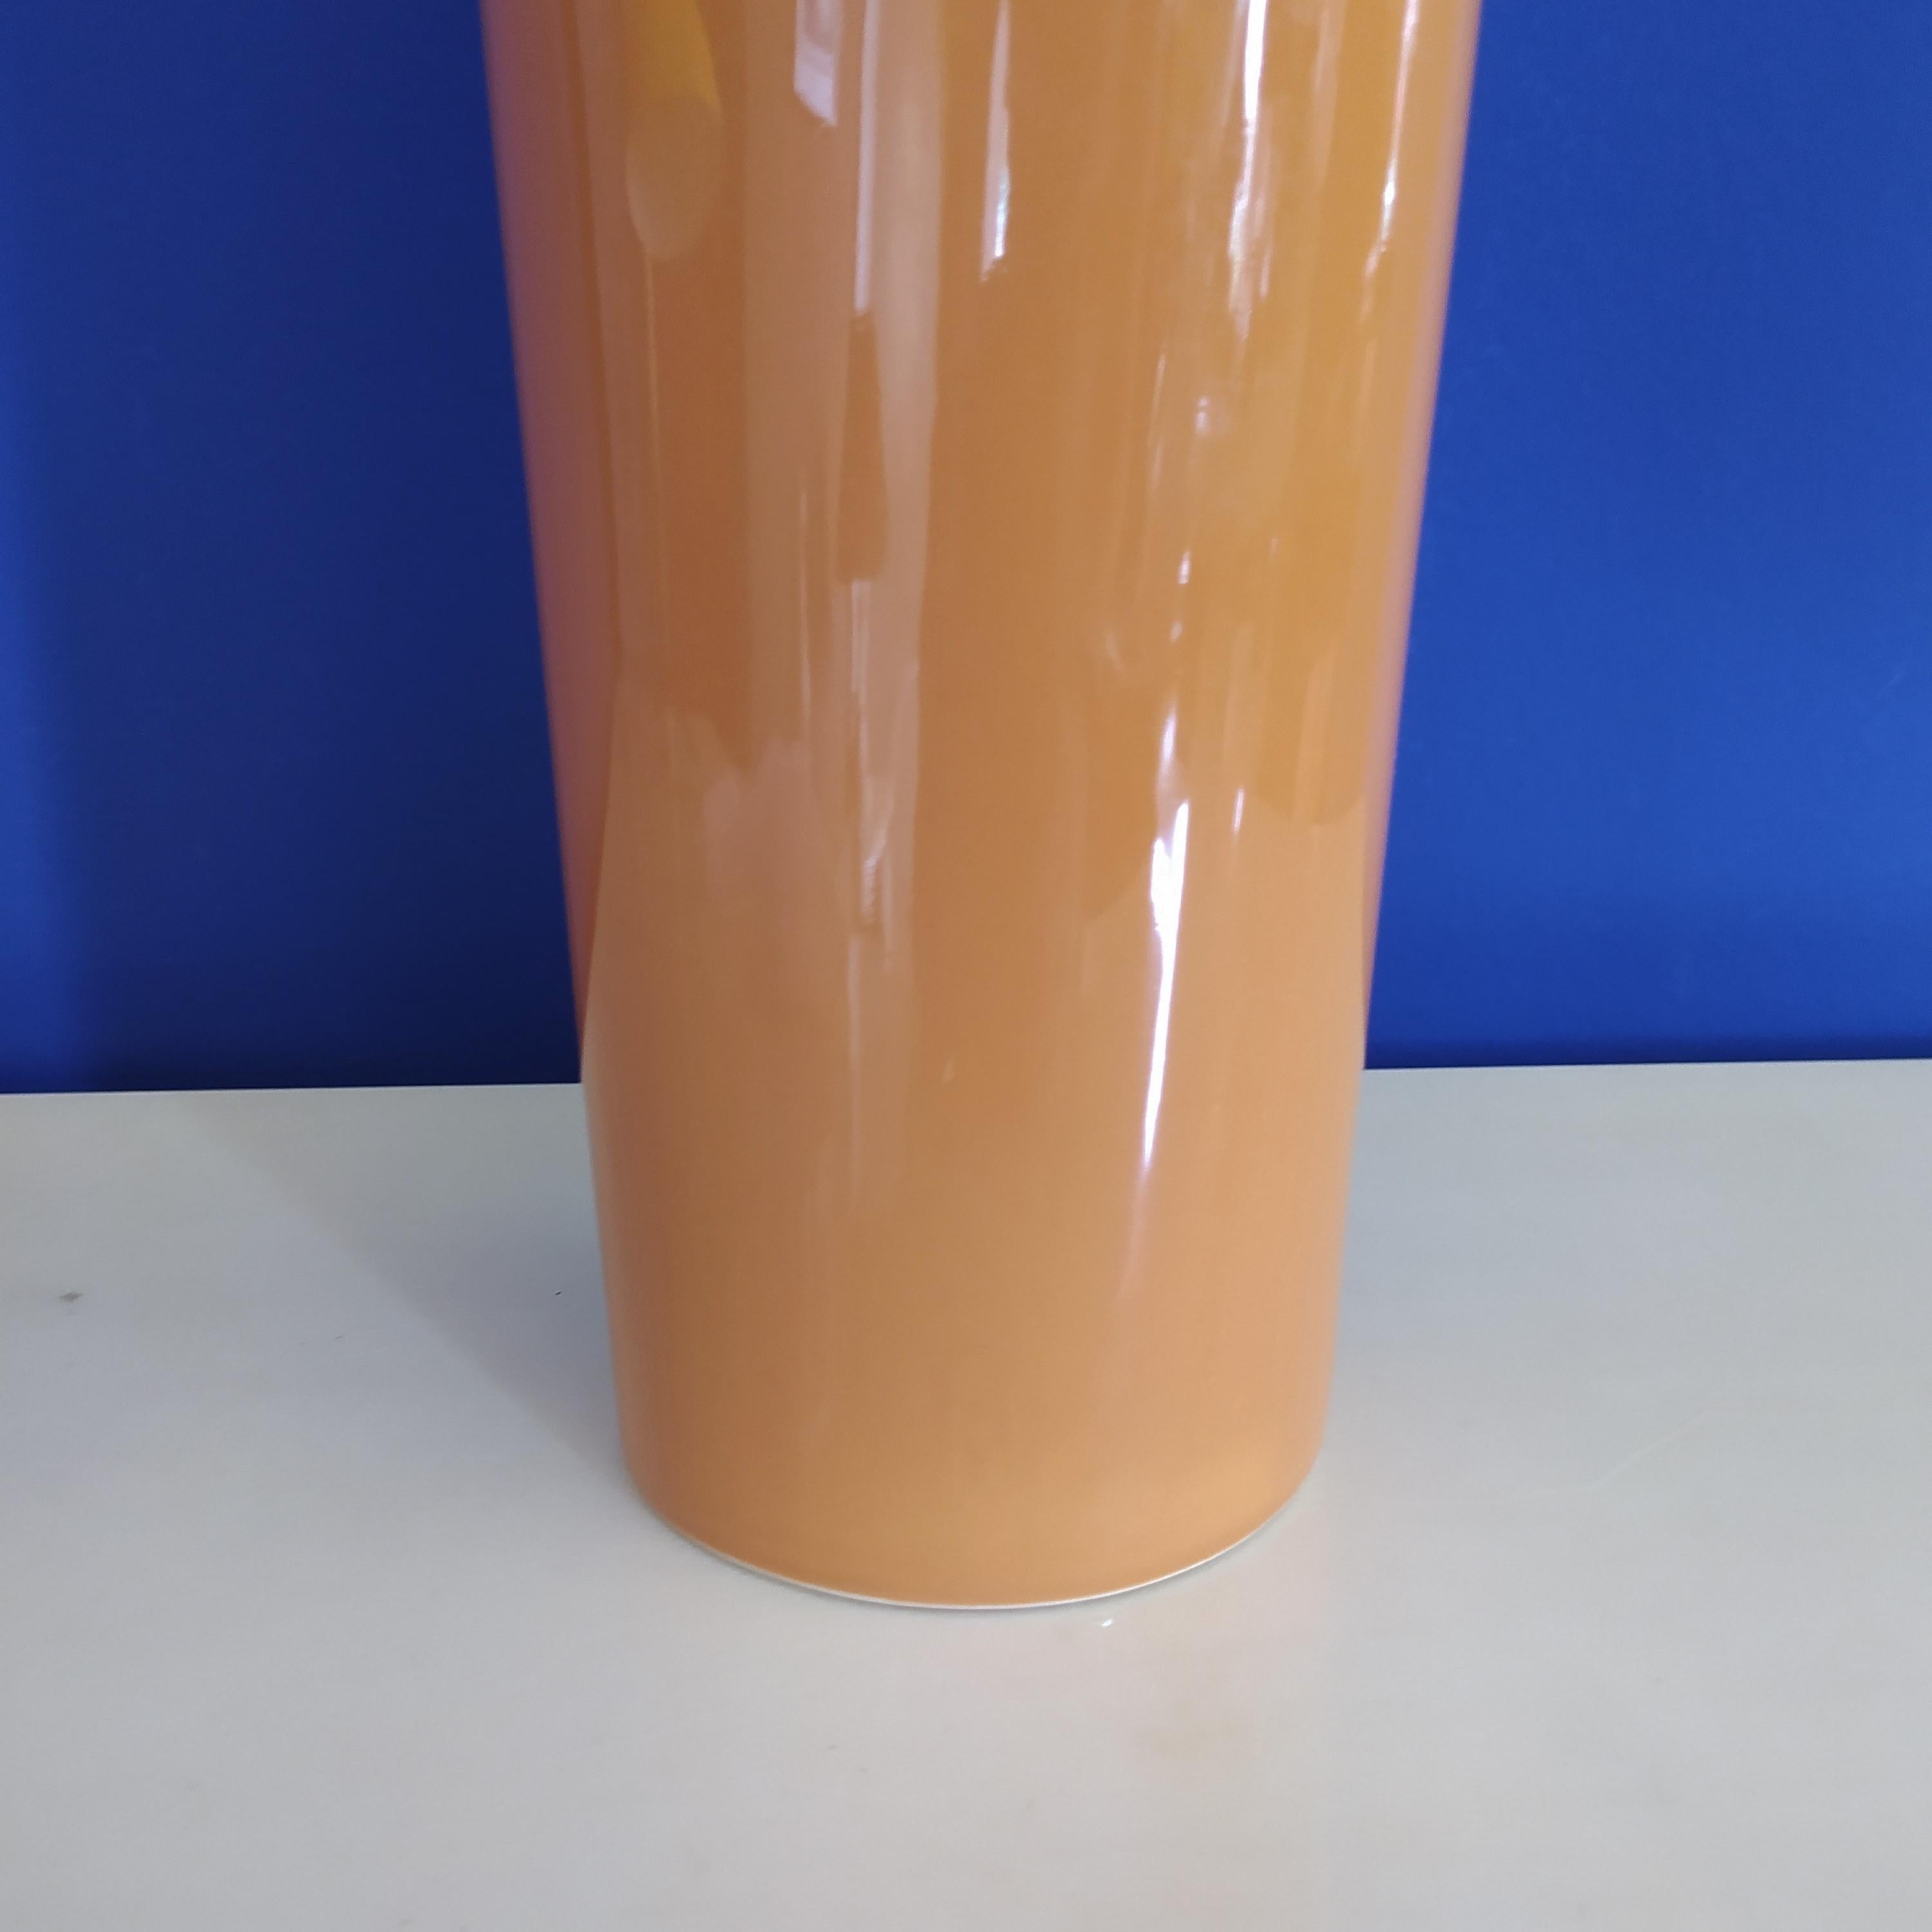 Late 20th Century 1970s Astonishing Space Age Orange Vase in Ceramic, Made in Italy For Sale